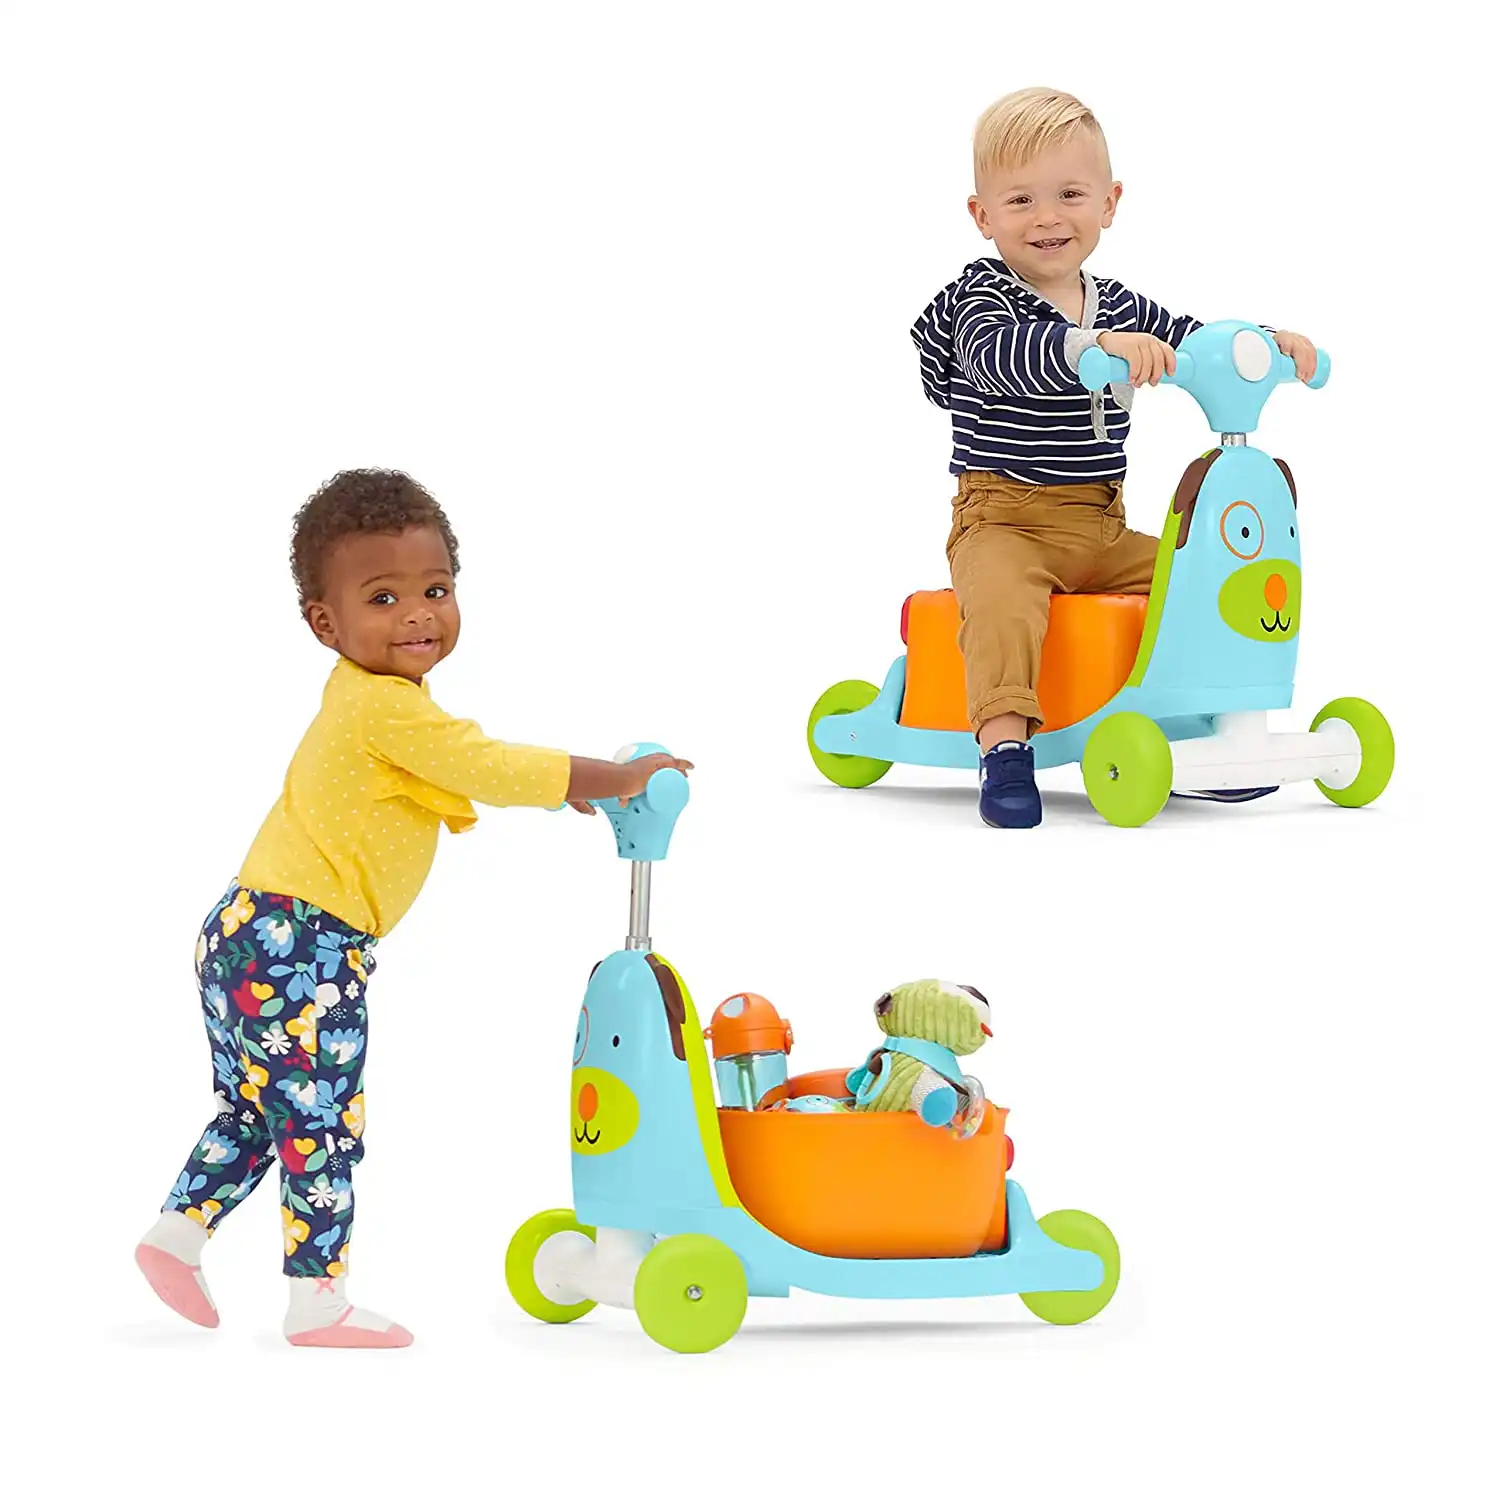 Skip Hop Kids 3-in-1 Ride On Scooter and Wagon Toy - Dog